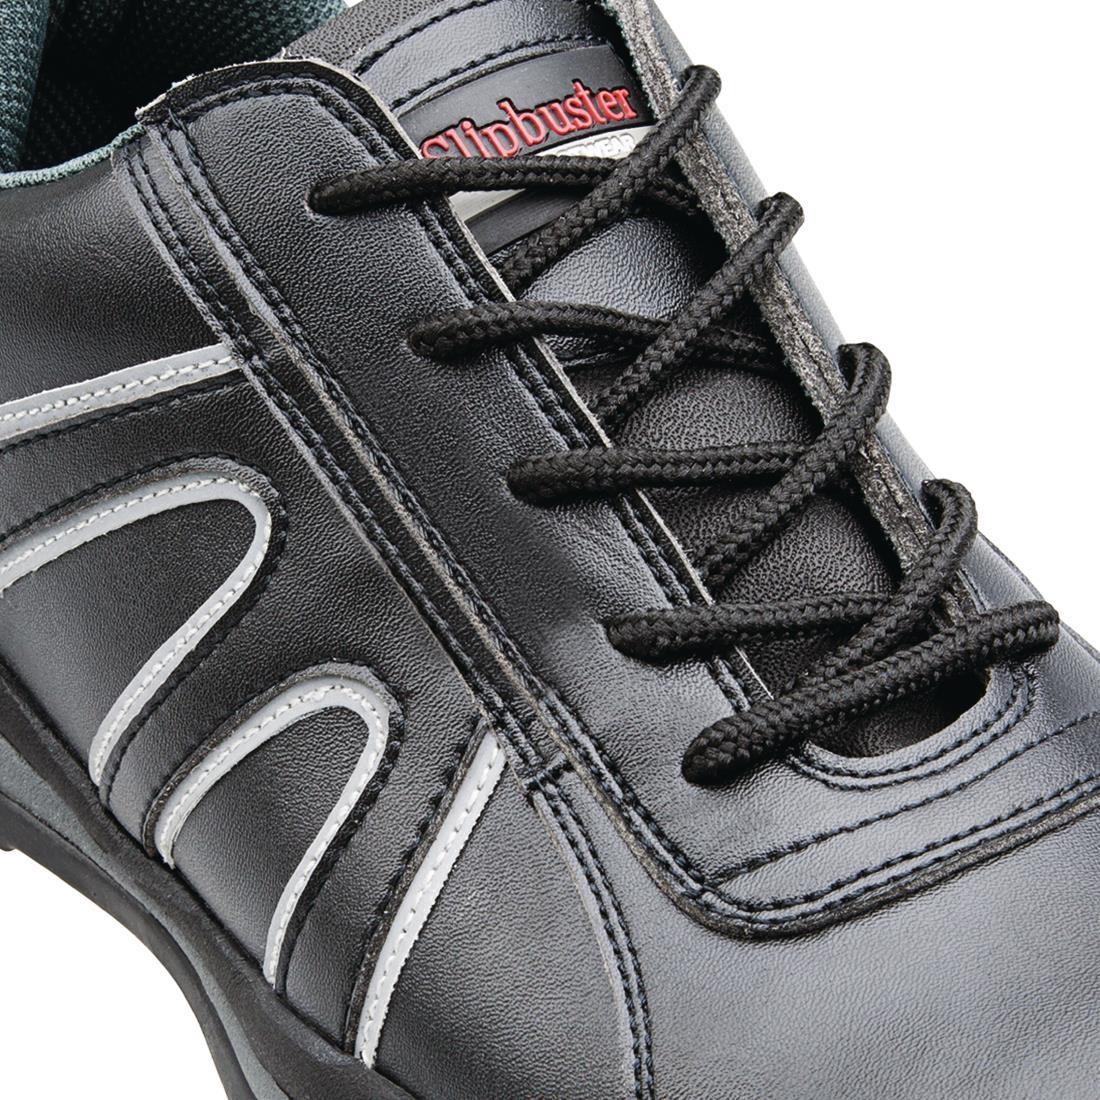 Slipbuster Safety Trainers Black 36 - A708-36  - 3